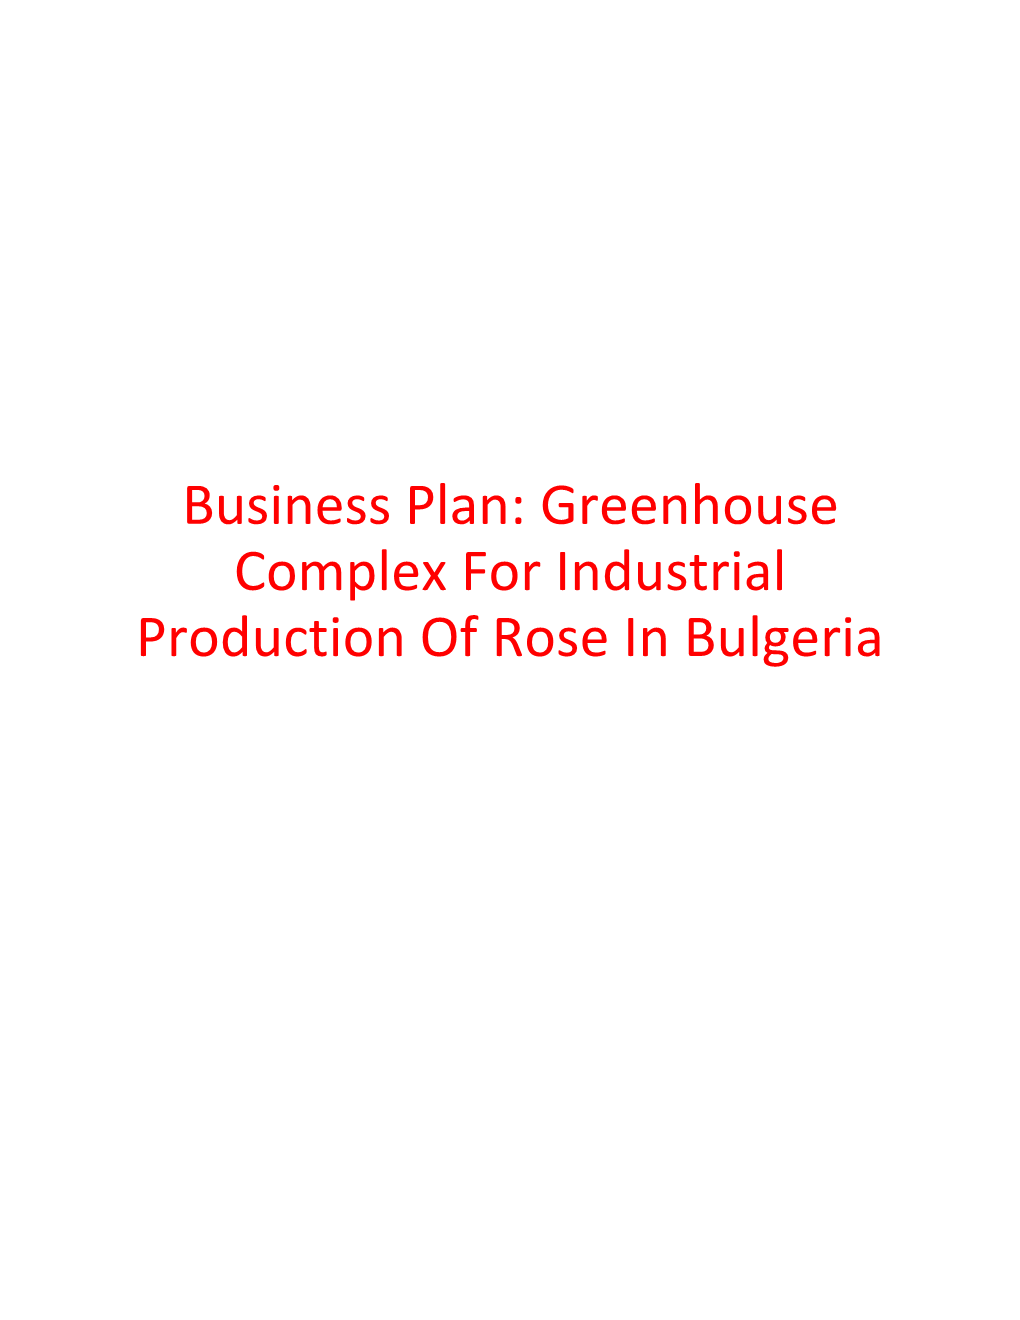 Business Plan: Greenhouse Complex for Industrial Production of Rose in Bulgeria